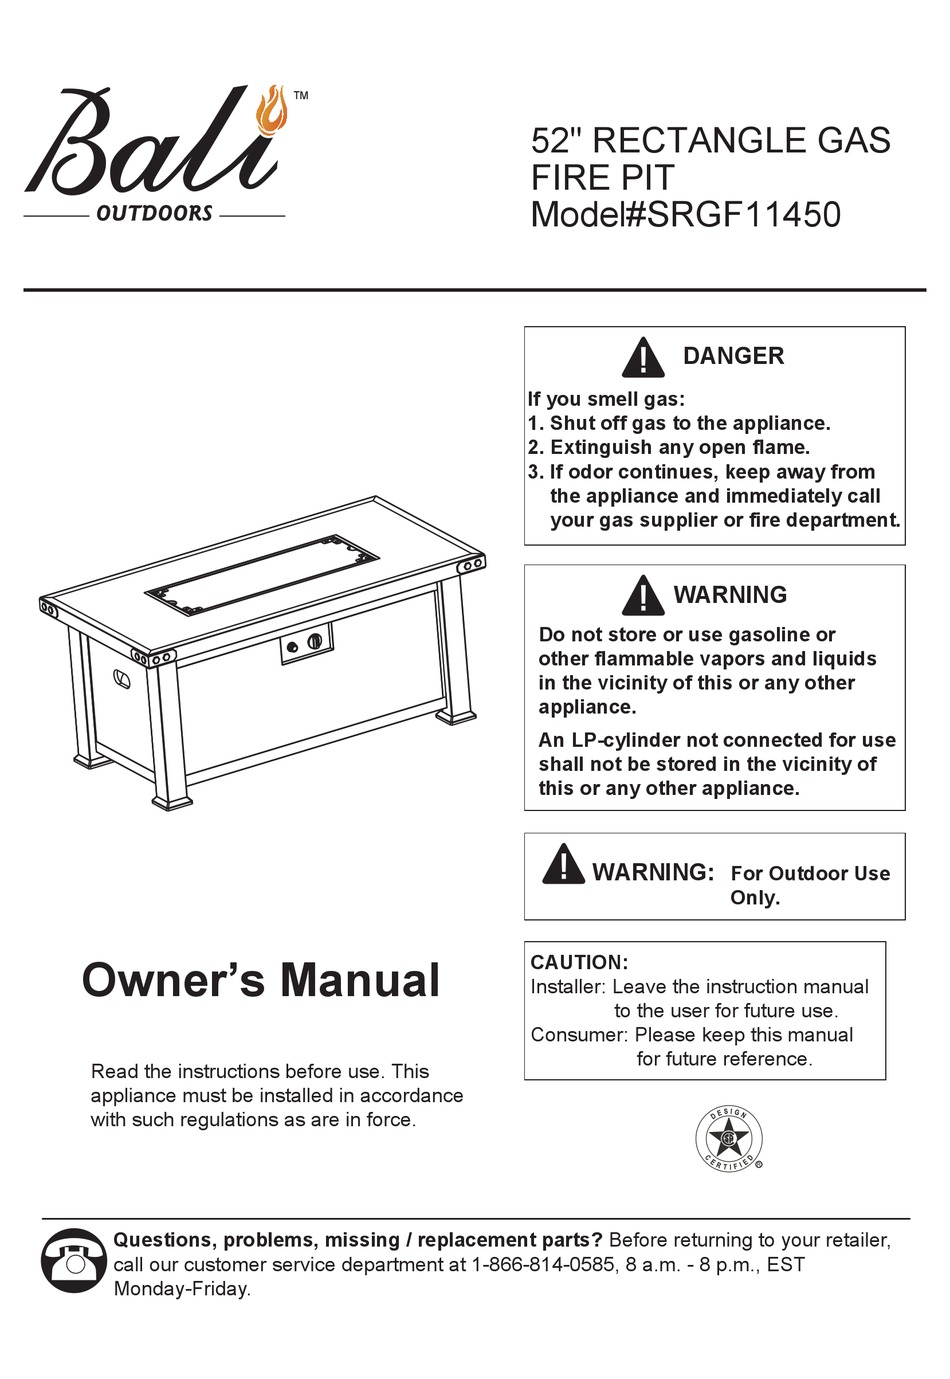 Bali Srgf11450 Owner S Manual Pdf, Outdoor Fire Pit Replacement Parts